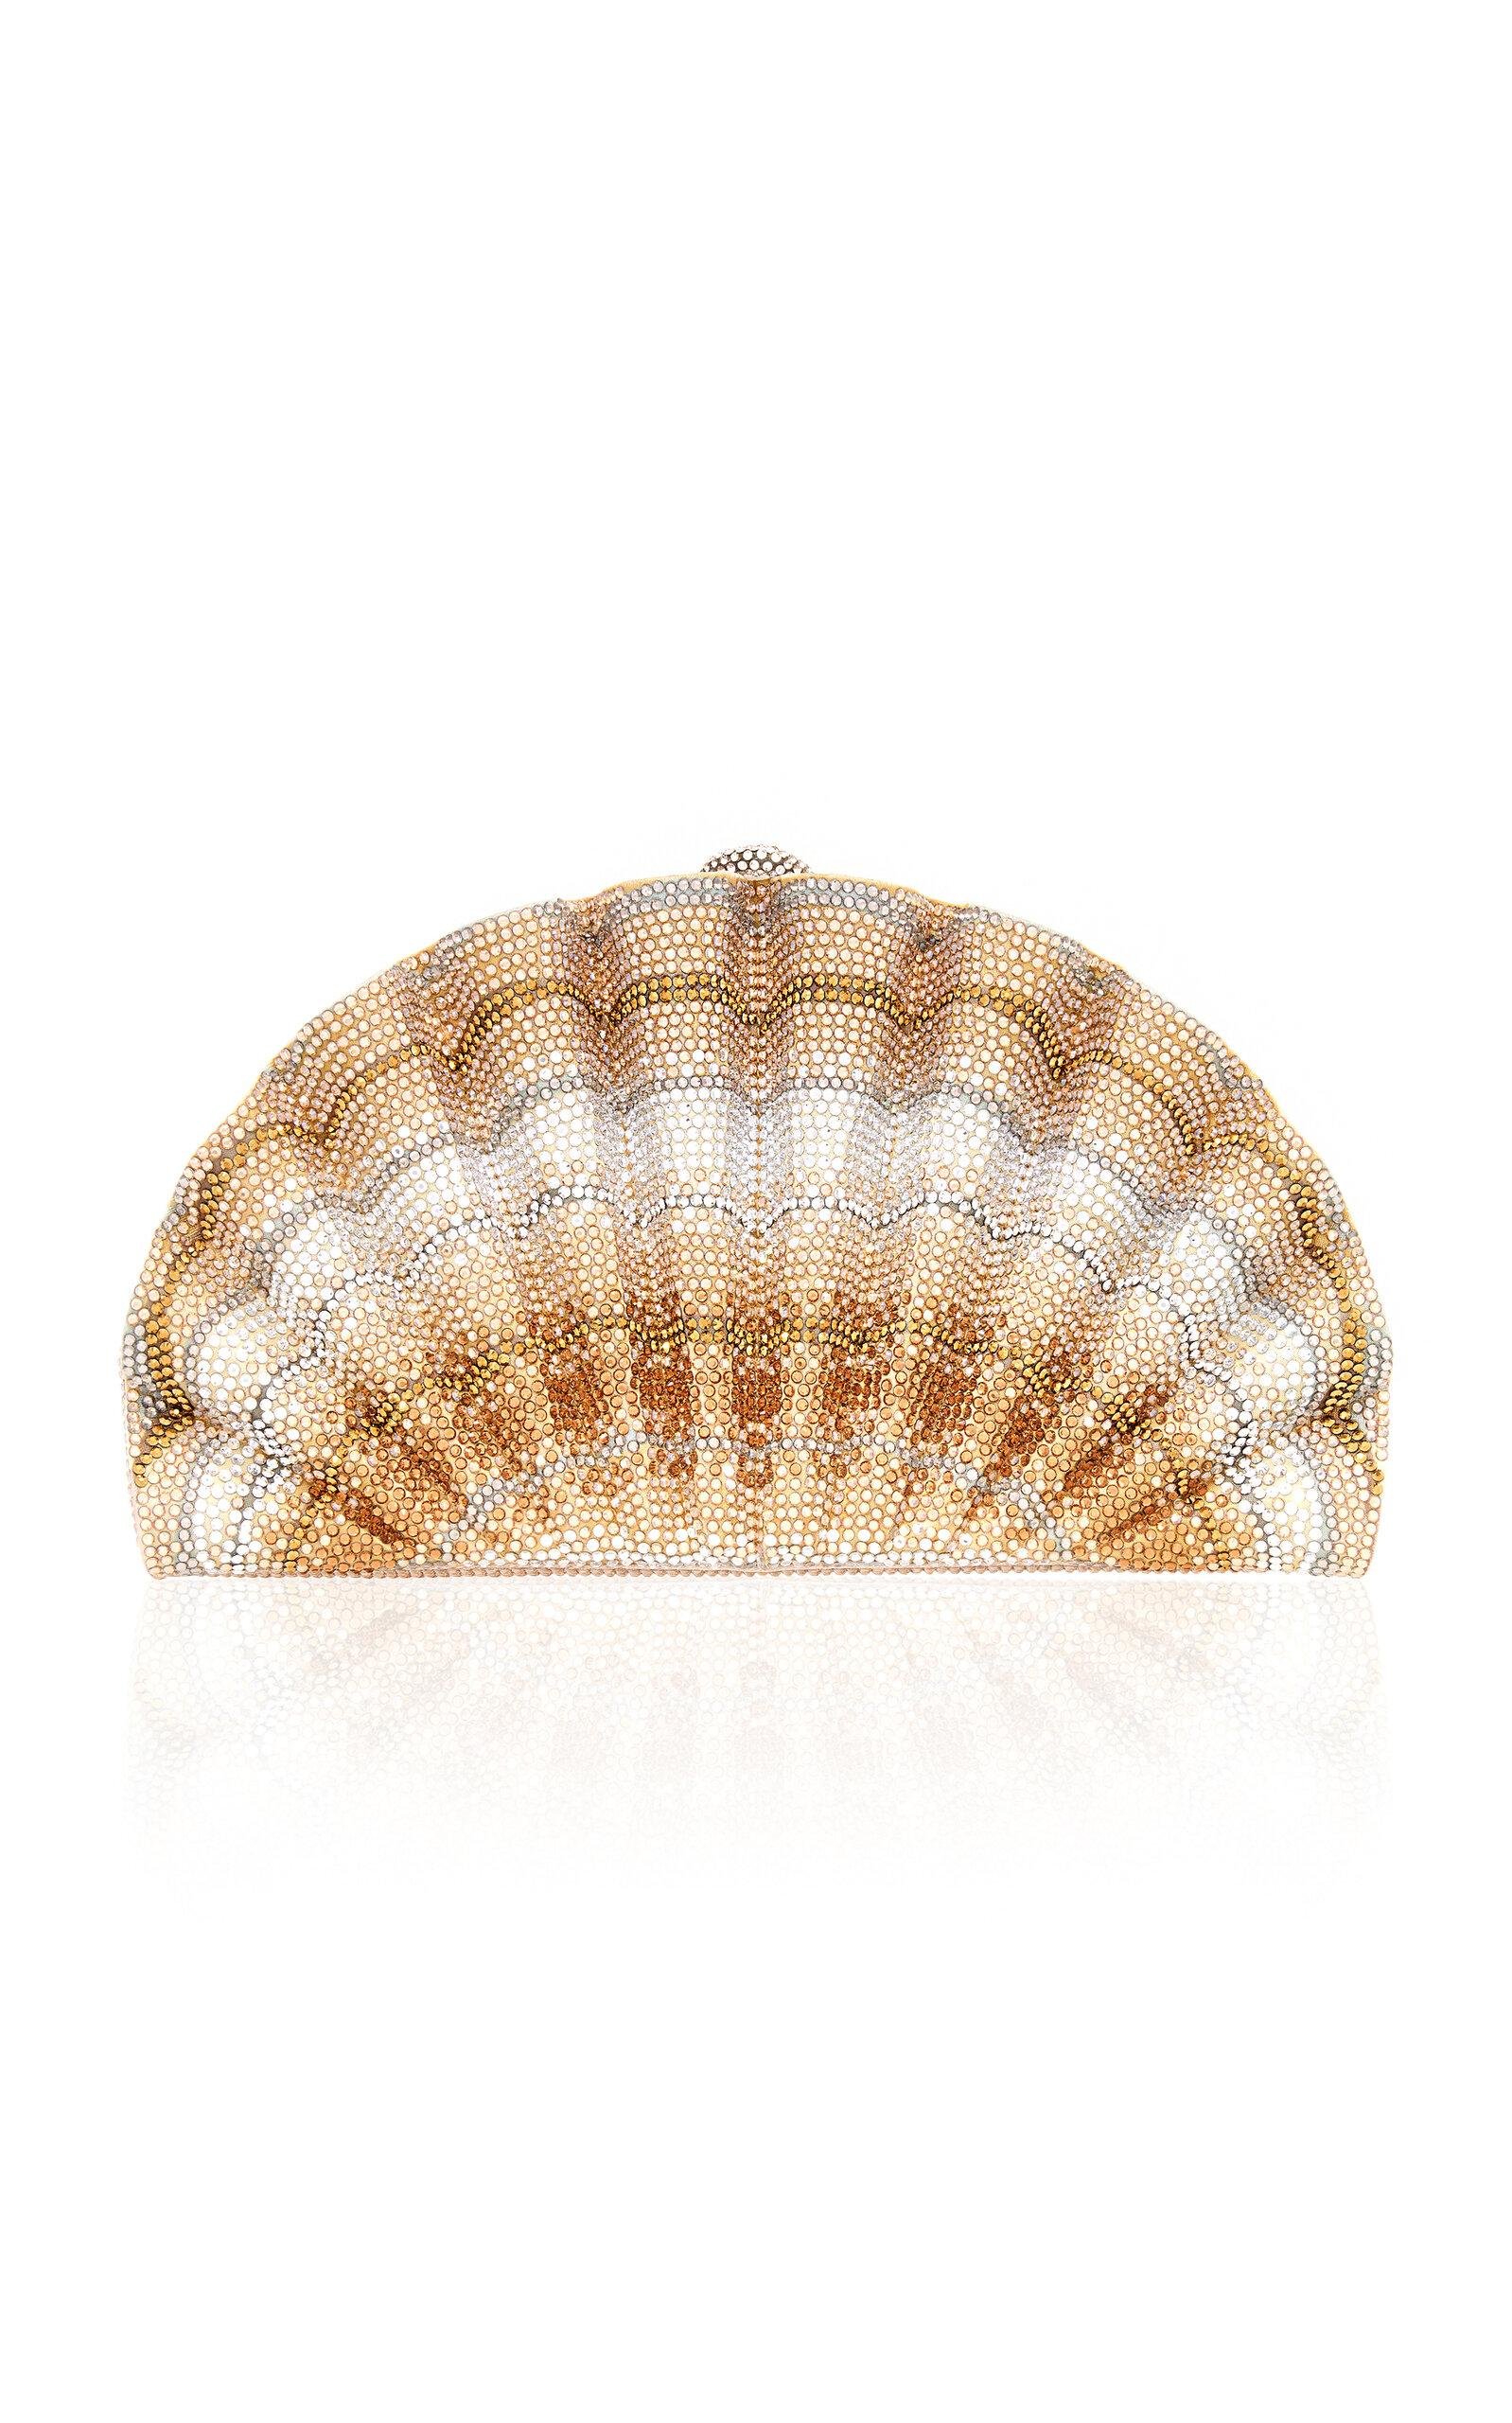 Judith Leiber Couture - Scallop Shell Origami Fan Crystal Clutch - Gold - OS - Only At Moda Operandi by JUDITH LEIBER COUTURE